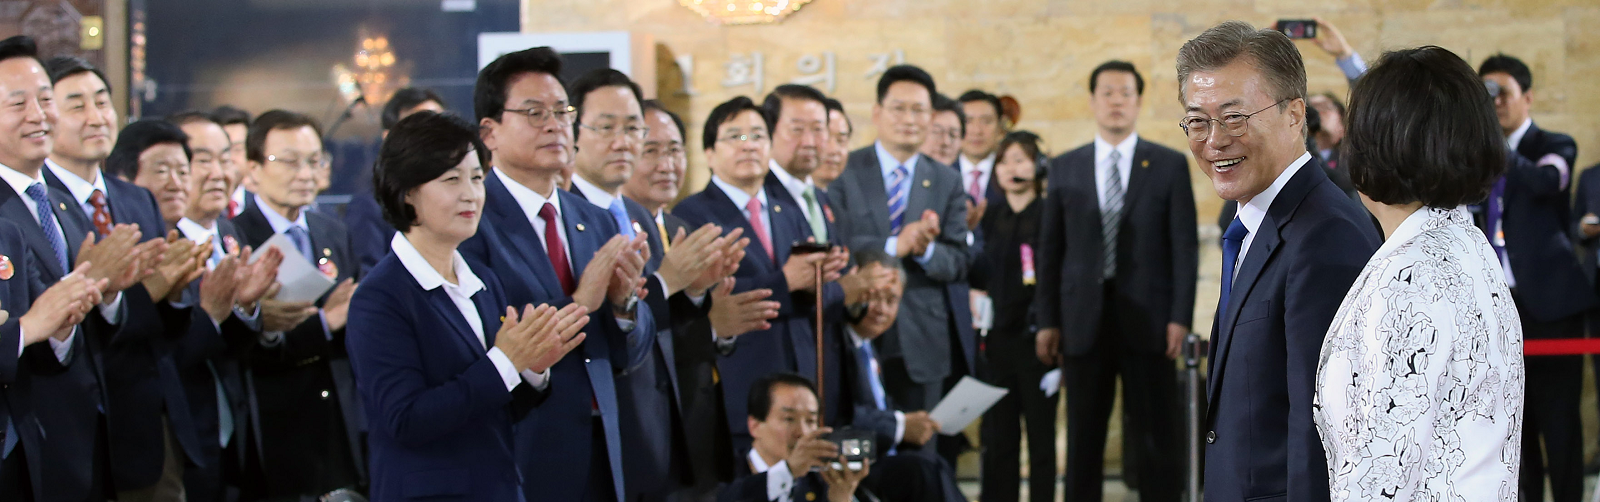  Inaugration of Moon Jae In (Photo: Korea.net / Korean Culture and Information Service)